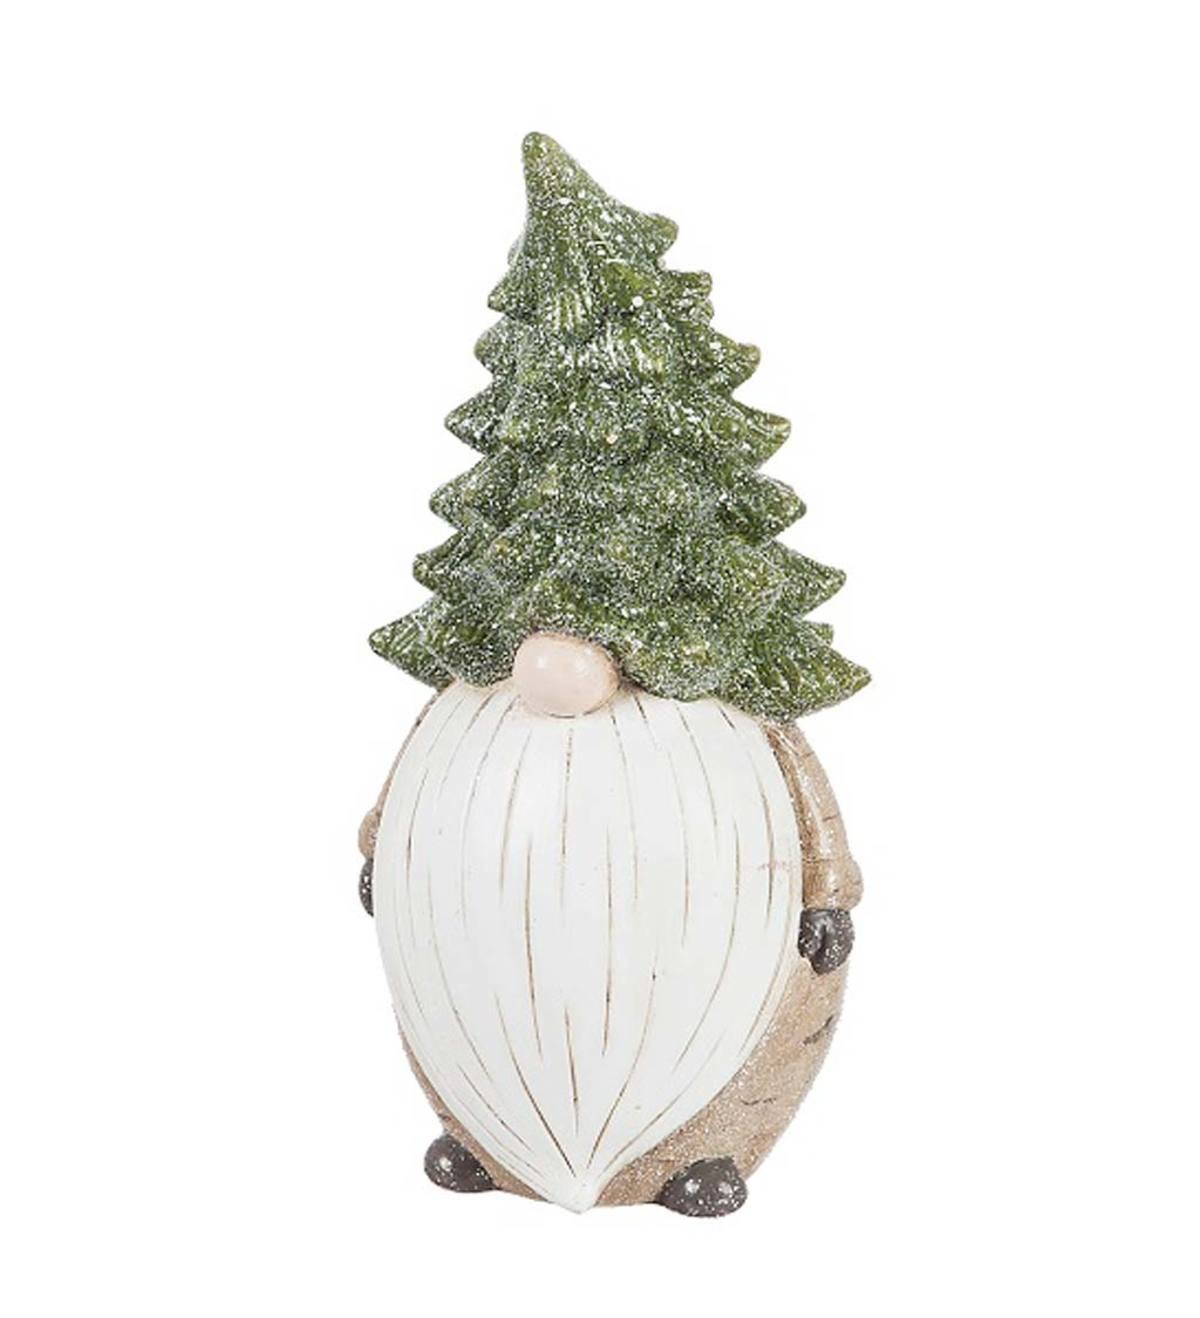 Ceramic Garden Gnome with Tall Evergreen Tree Hat